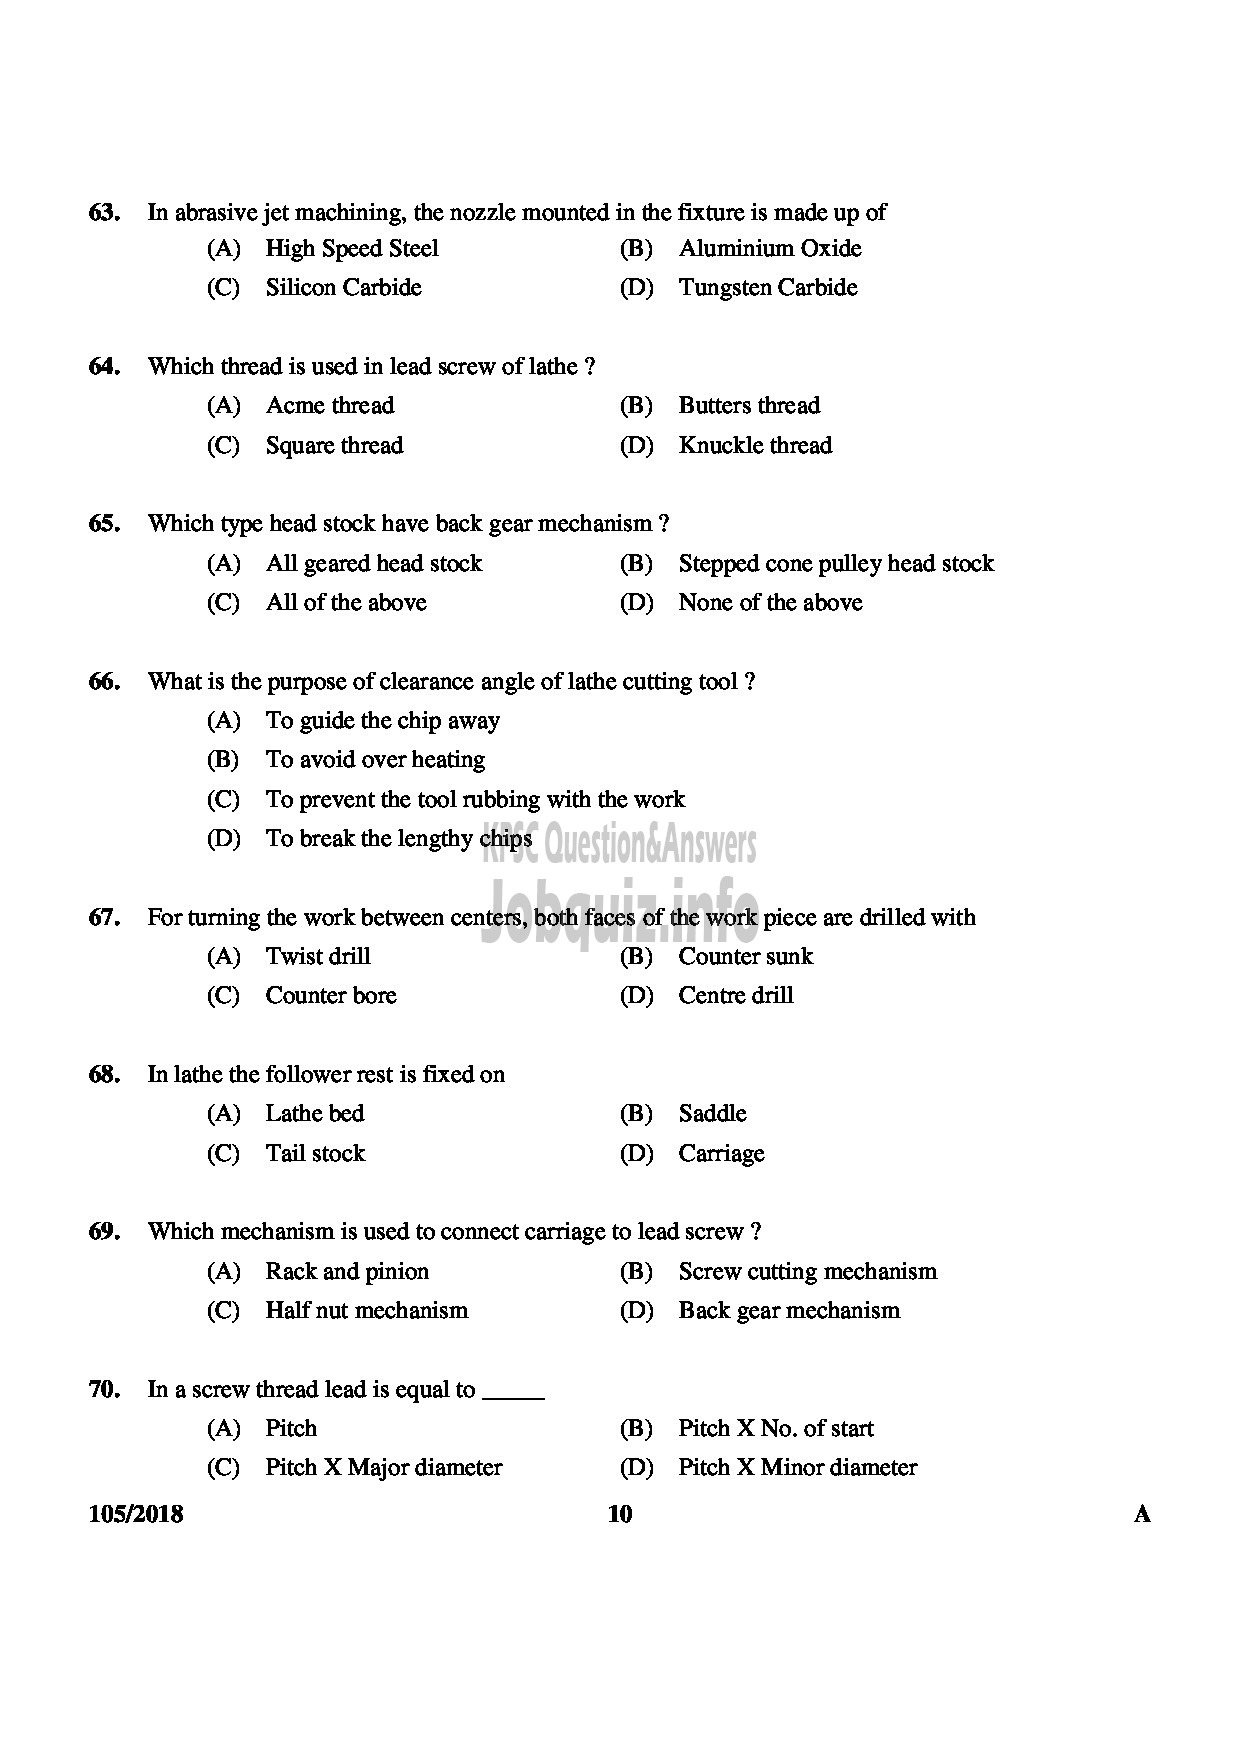 Kerala PSC Question Paper - JUNIOR INSTRUCTOR MACHINIST INDUSTRIAL TRAINING English -10